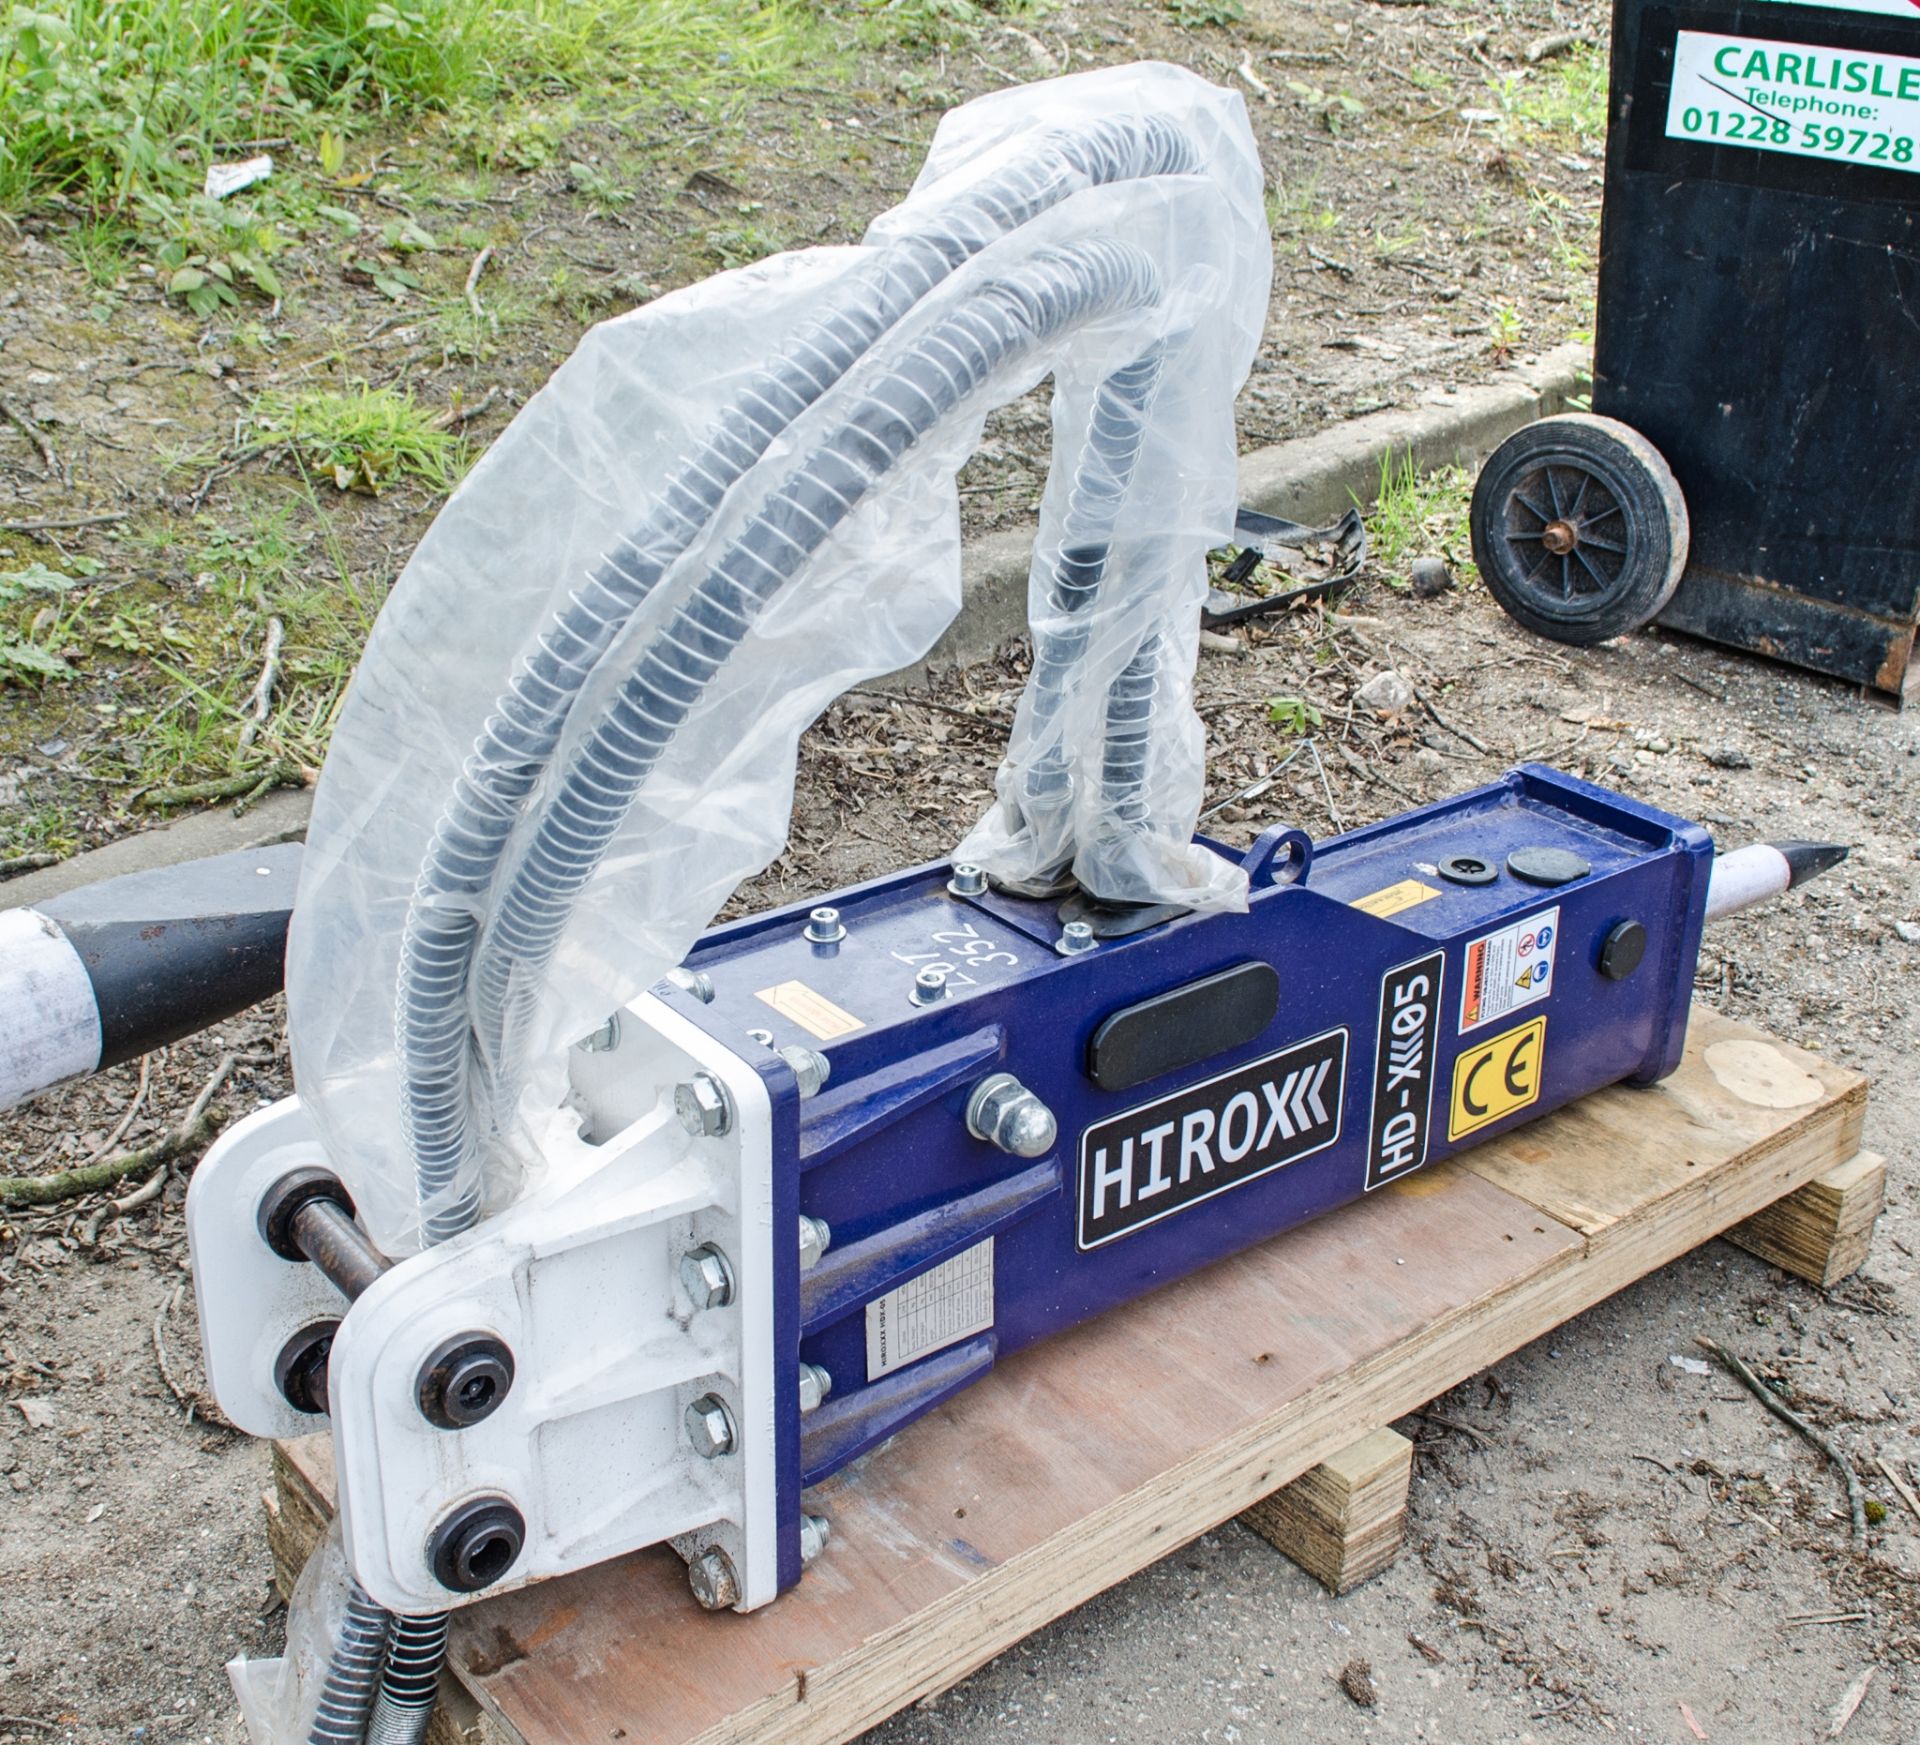 Hirox HDX05 hydraulic breaker to suit 0.5 to 1.5 tonne machine New & Unused - Image 2 of 4